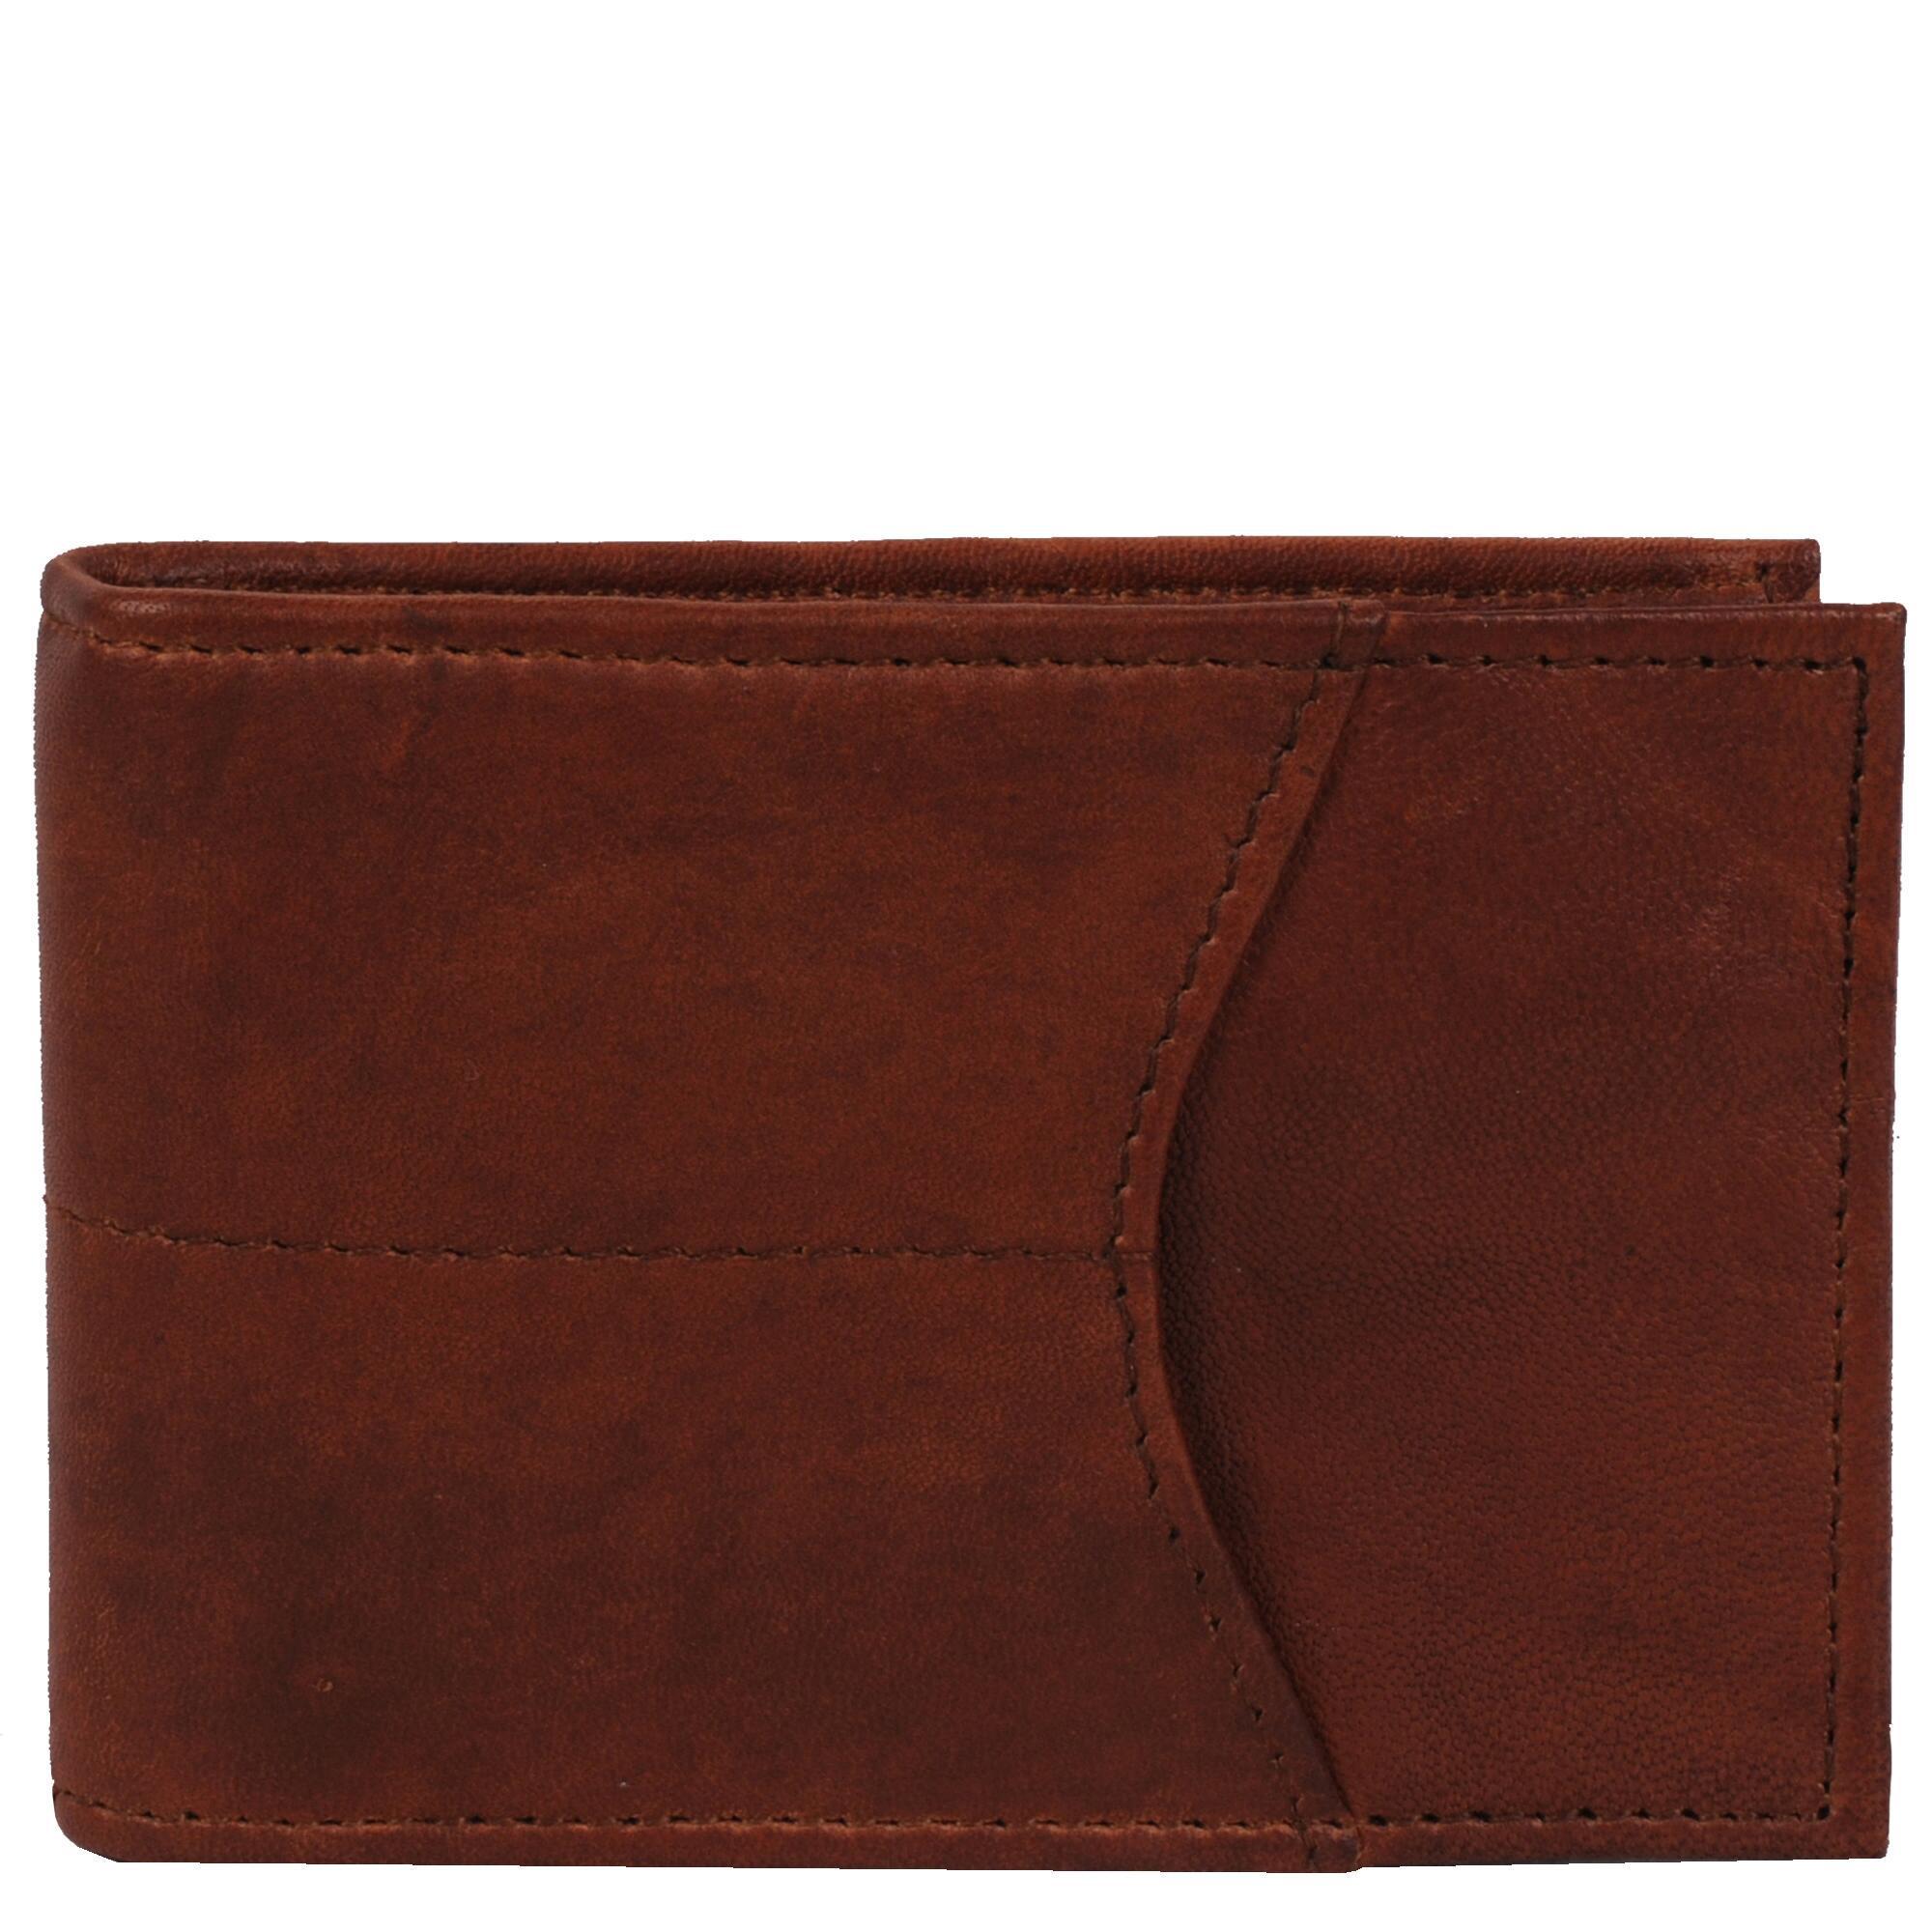 Lyst - Wilsons Leather Marc New York Rfid Washed Front Pocket Leather Wallet in Brown for Men